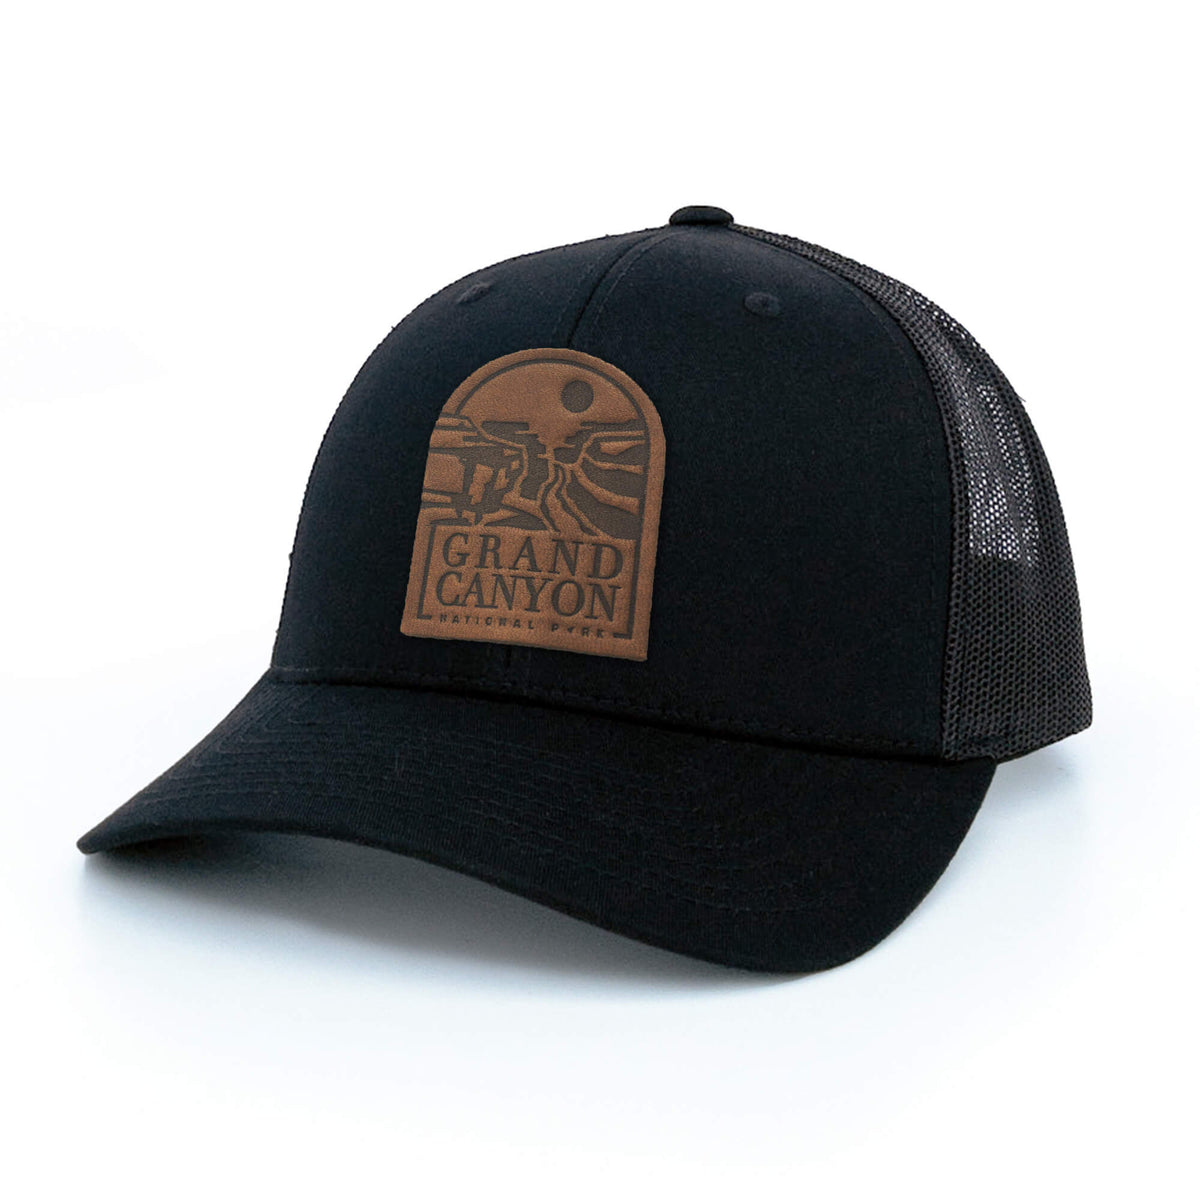 Black trucker hat with full-grain leather patch of Grand Canyon National Park | BLACK-007-004, CHARC-007-004, NAVY-007-004, HGREY-007-004, MOSS-007-004, BROWN-007-004